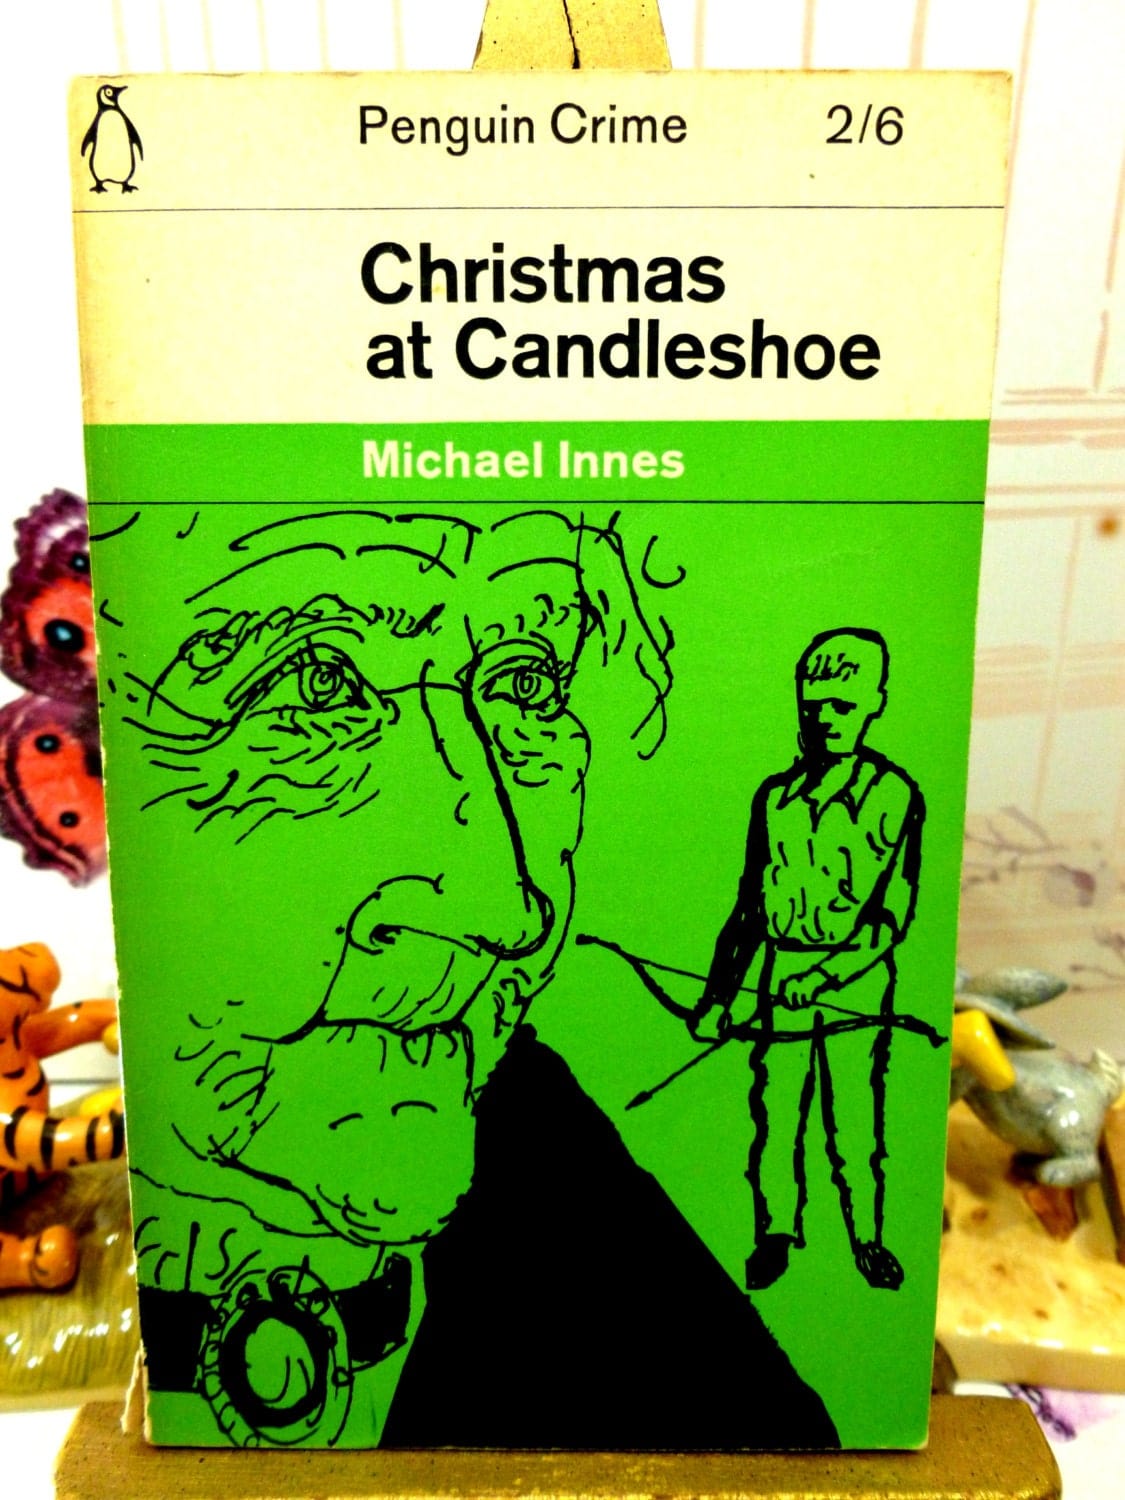 Front cover of Vintage Penguin Paperback Christmas at Candleshoe by Michael Innes First Edition showing a drawing of a man and a boy on a green ground. 